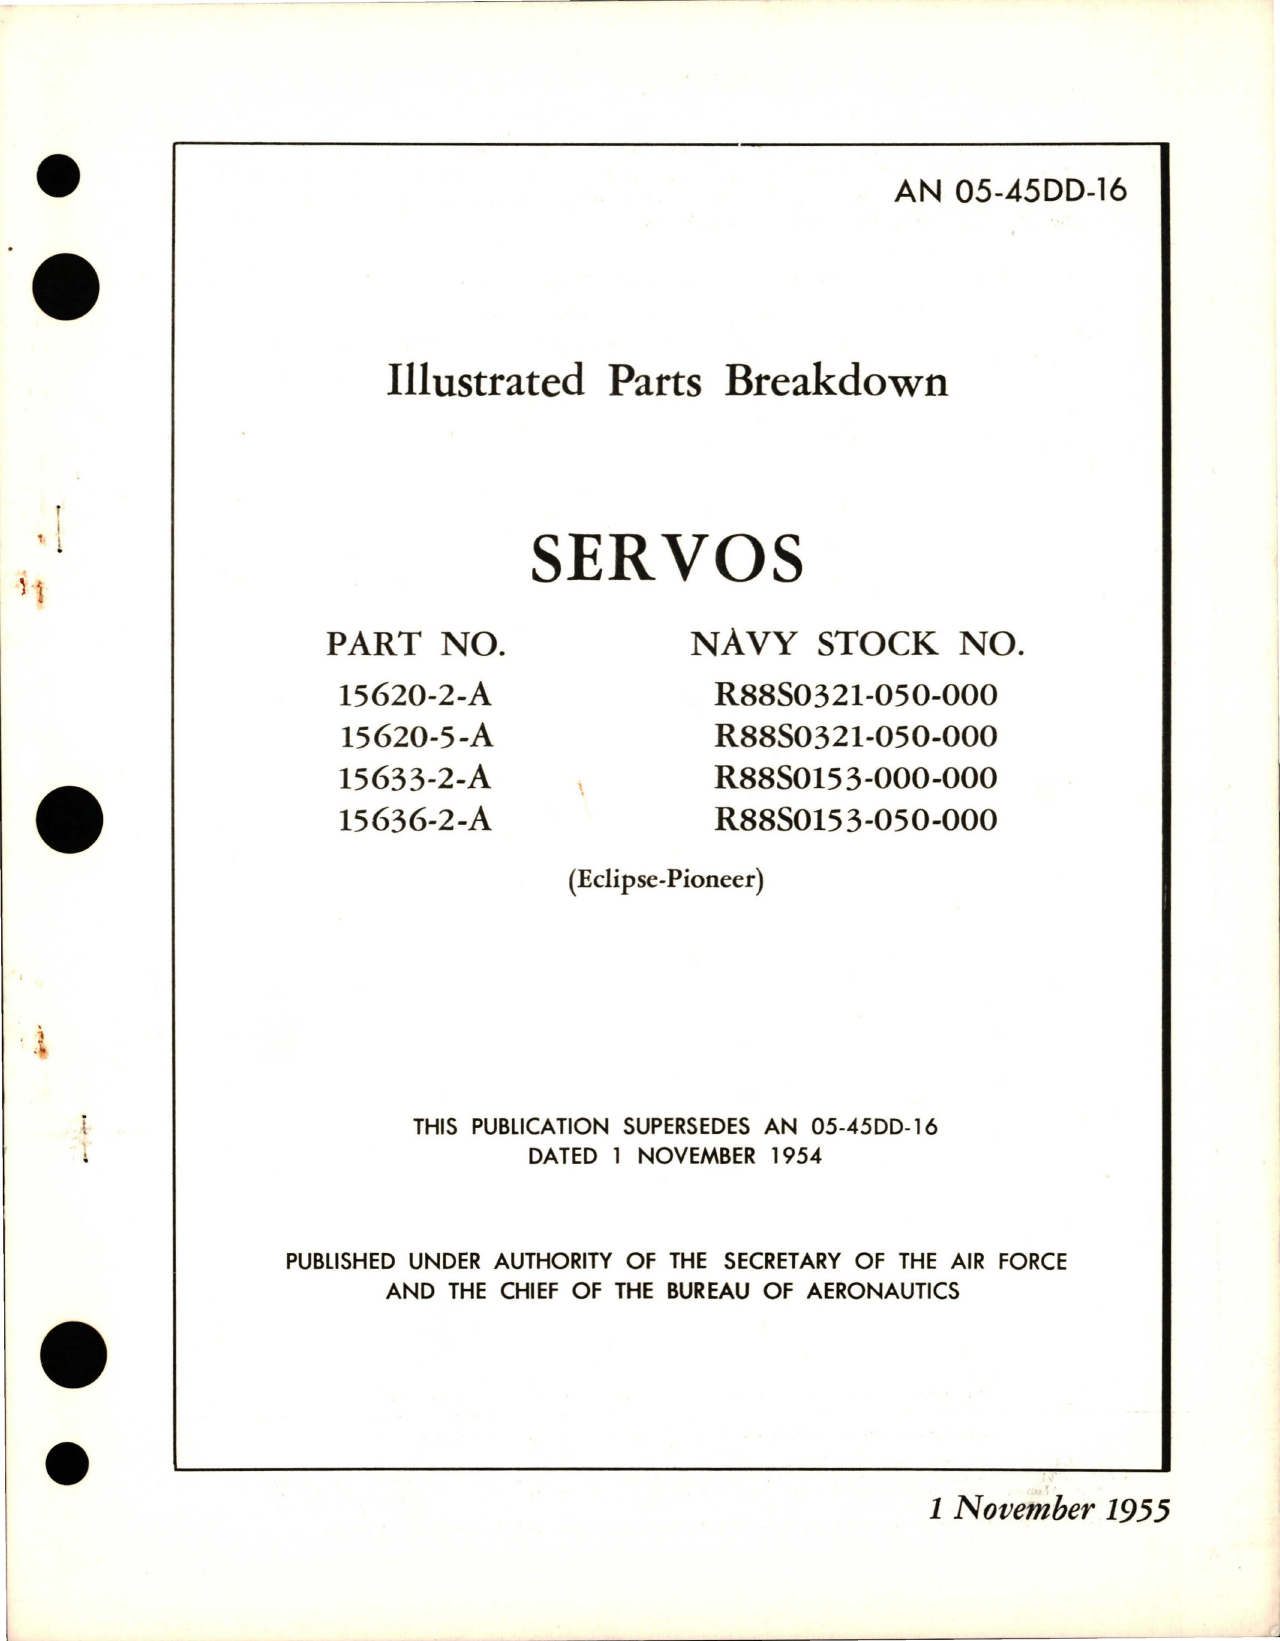 Sample page 1 from AirCorps Library document: Illustrated Parts Breakdown for Servos - Parts 15620-2-A, 15620-5-A, 15633-2-A, and 15636-2-A